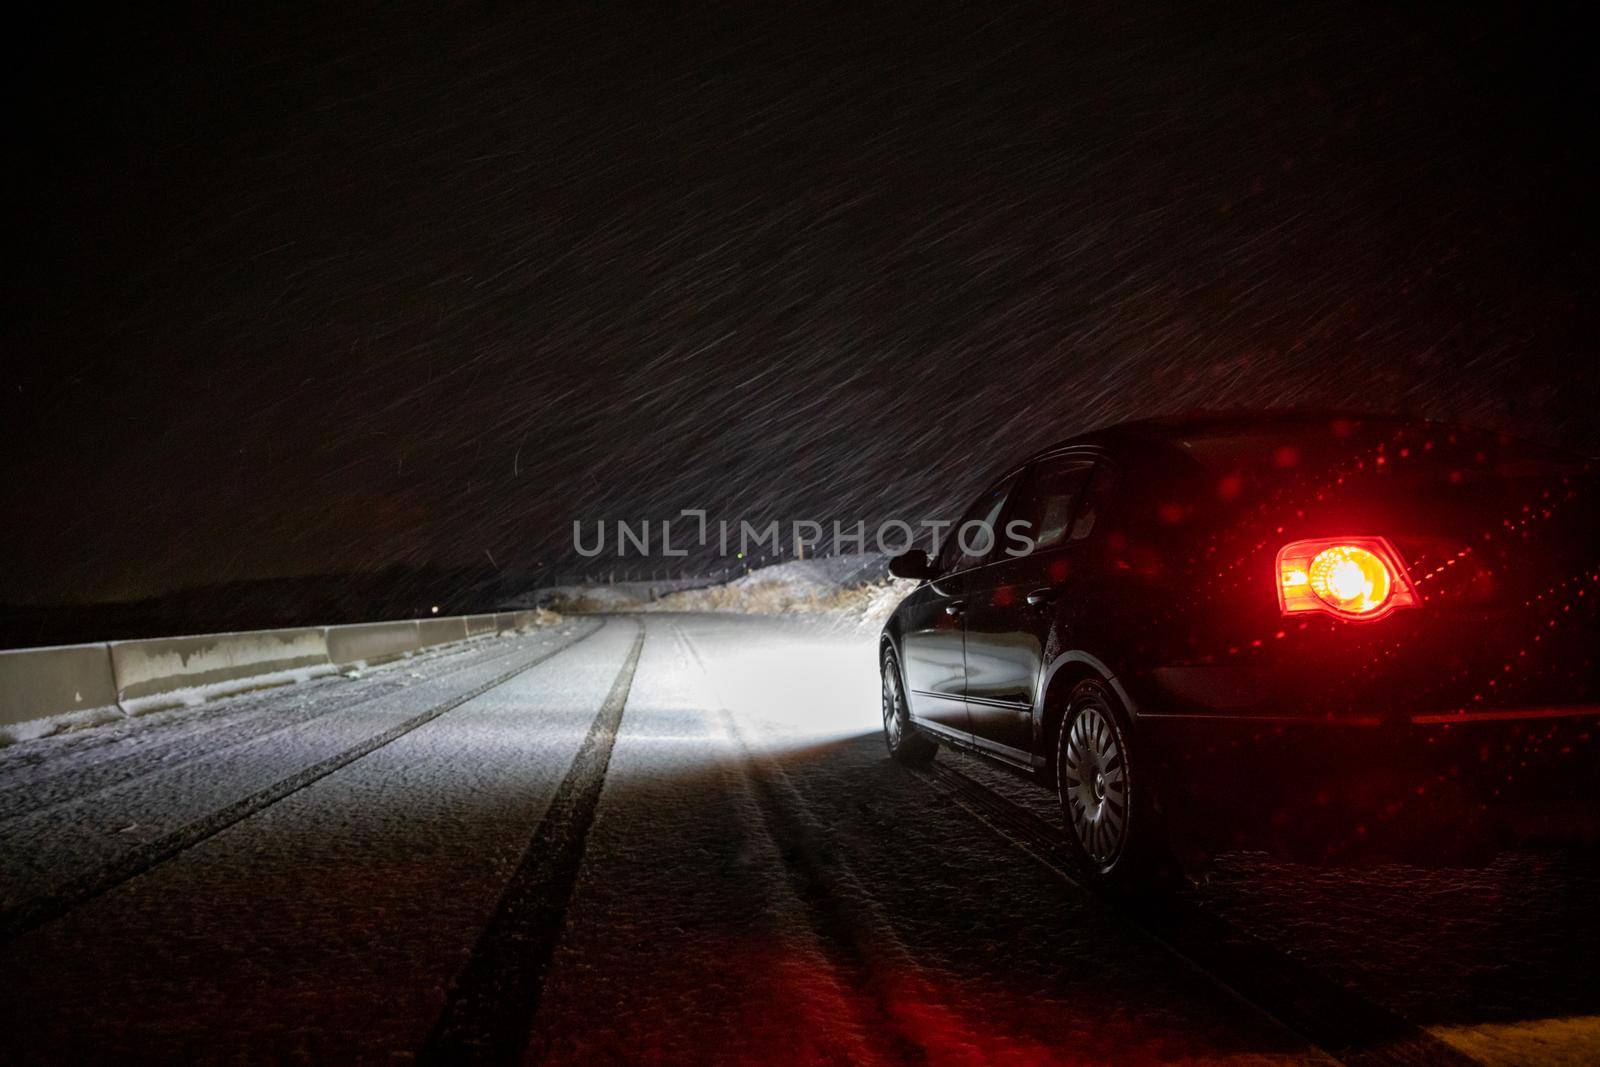 Car driving at night during a snow storm where it can be dangerous